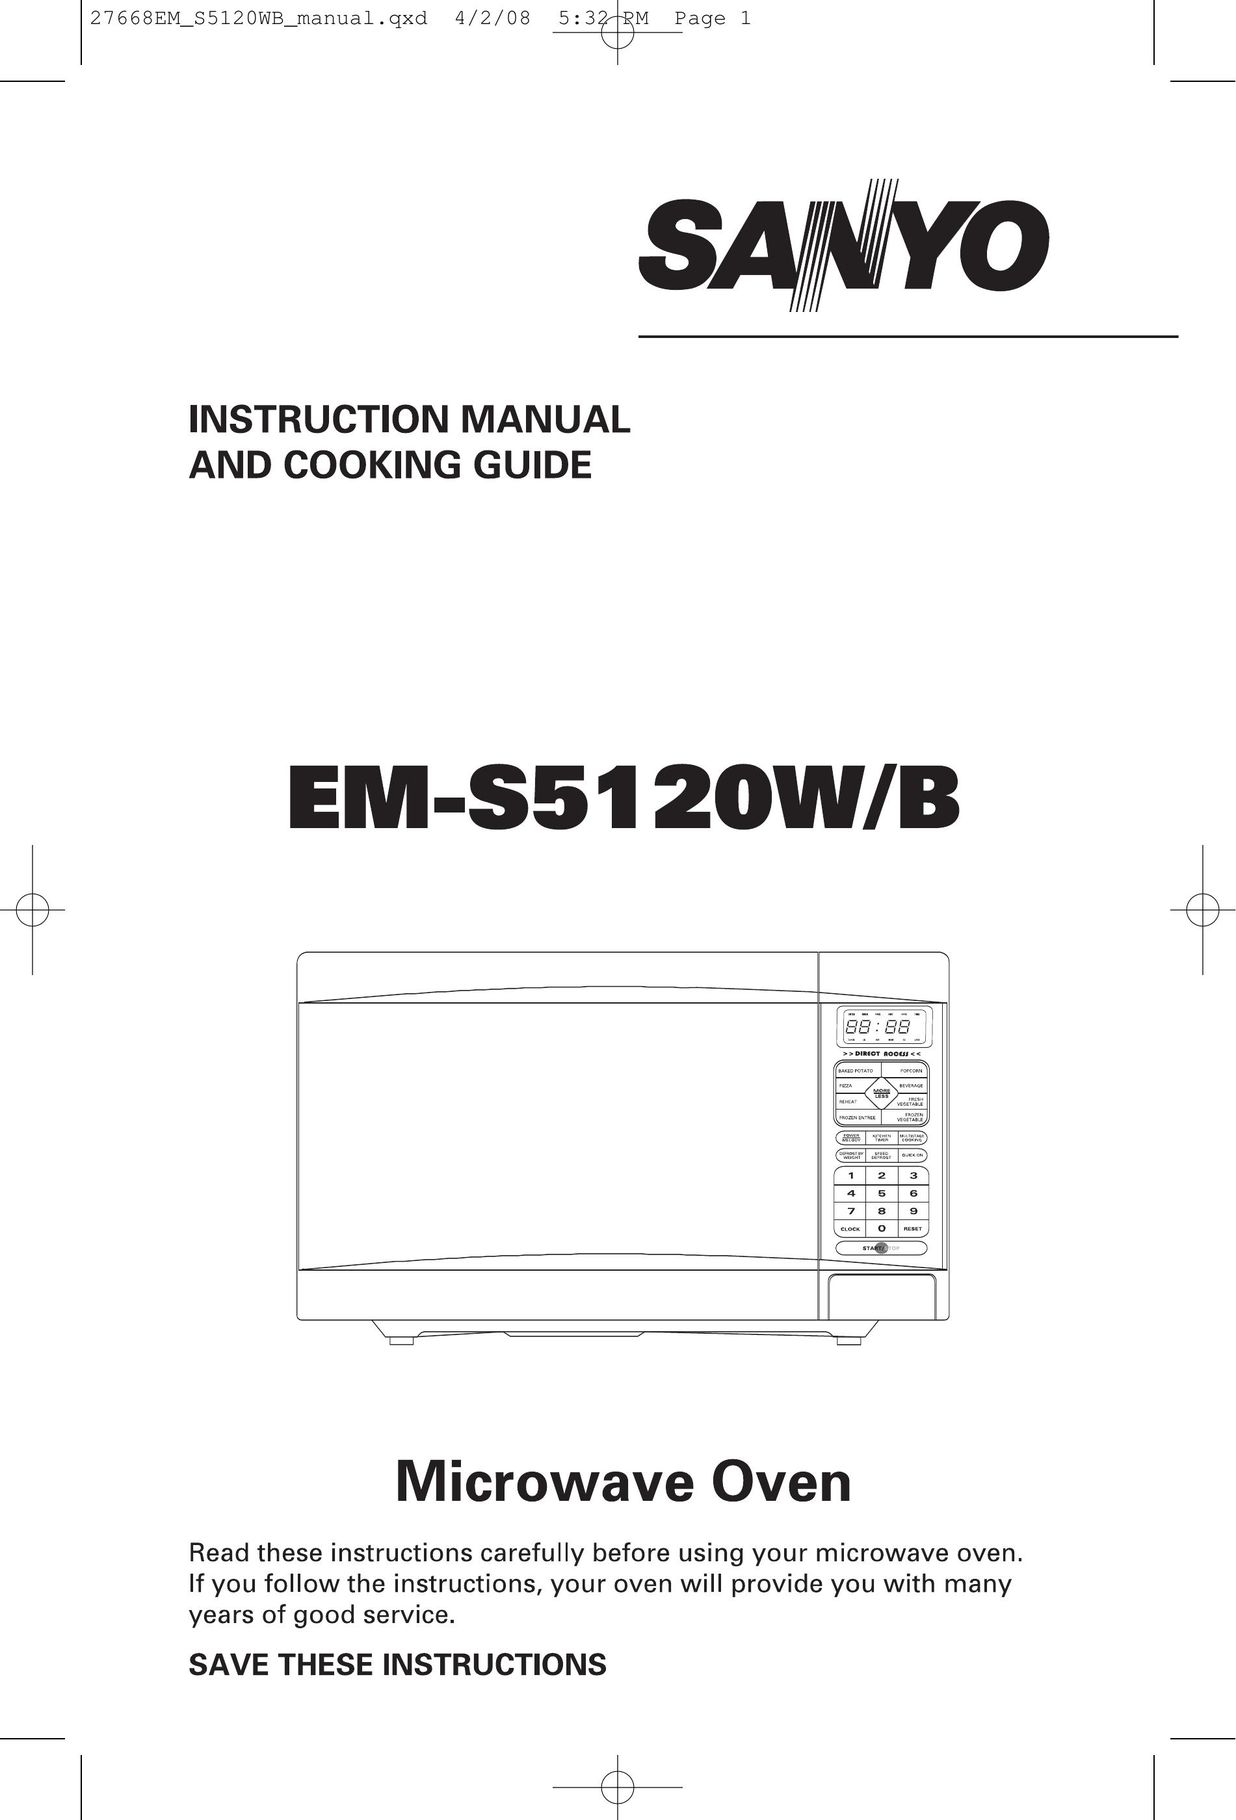 Sanyo EM-S5120WB Microwave Oven User Manual